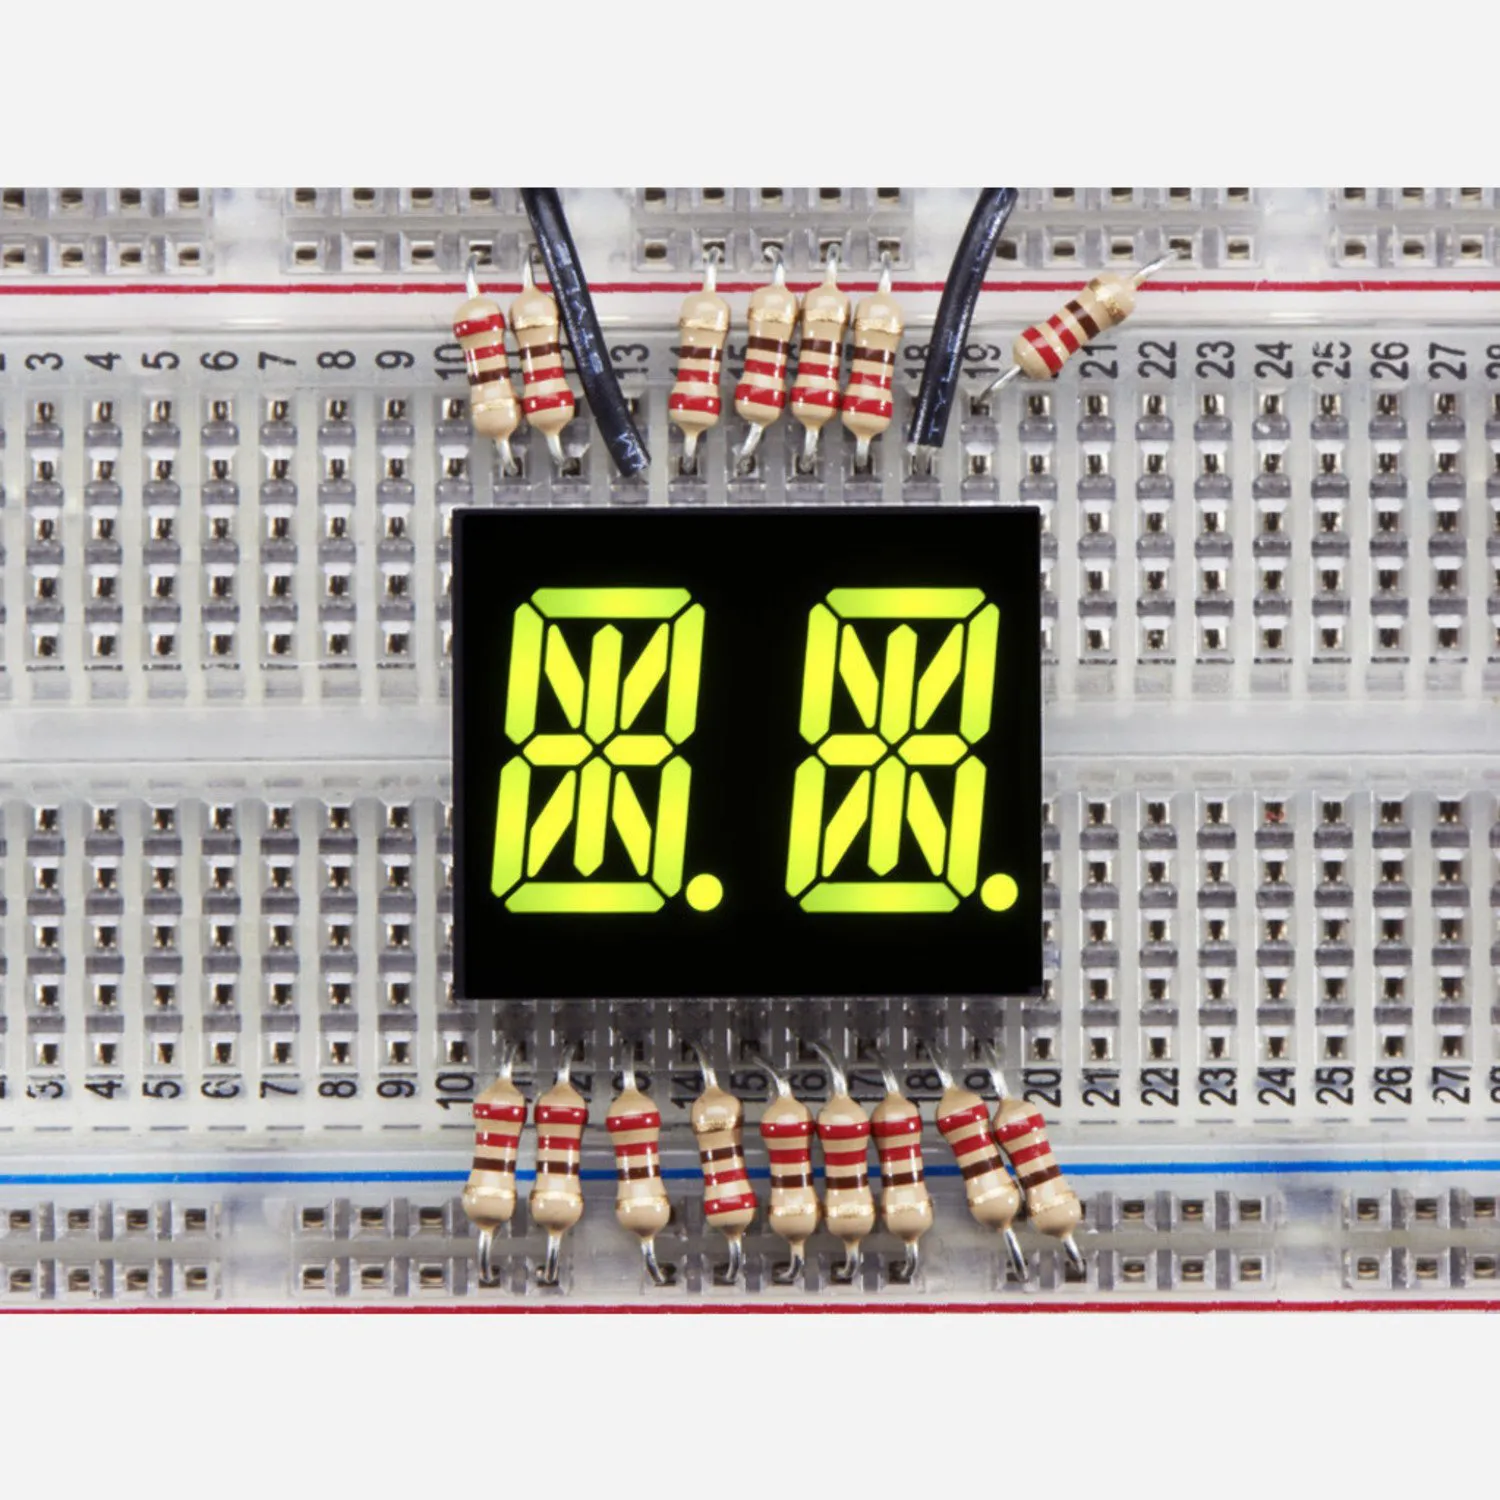 Photo of Dual Alphanumeric Display - Yellow-Green 0.54 - Pack of 2